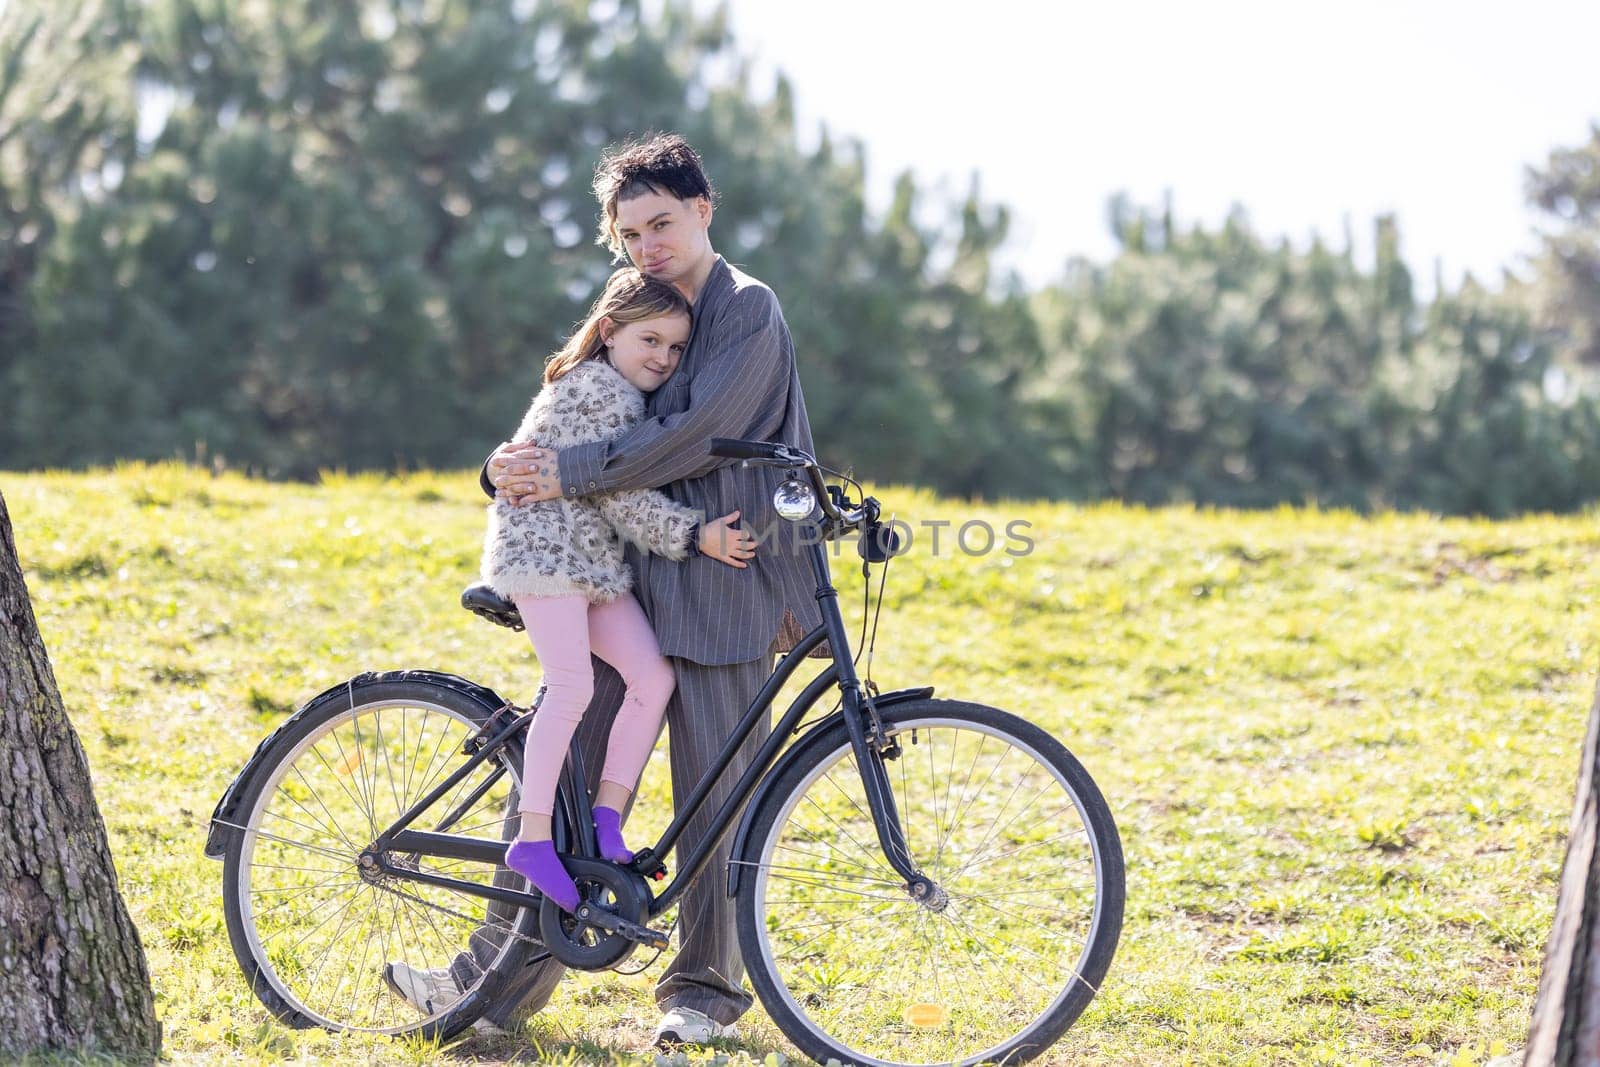 A woman and a little girl - her daughter - are hugging each other while sitting on a bicycle. The scene is peaceful and heartwarming, with the two of them enjoying each other's company in a beautiful outdoor setting